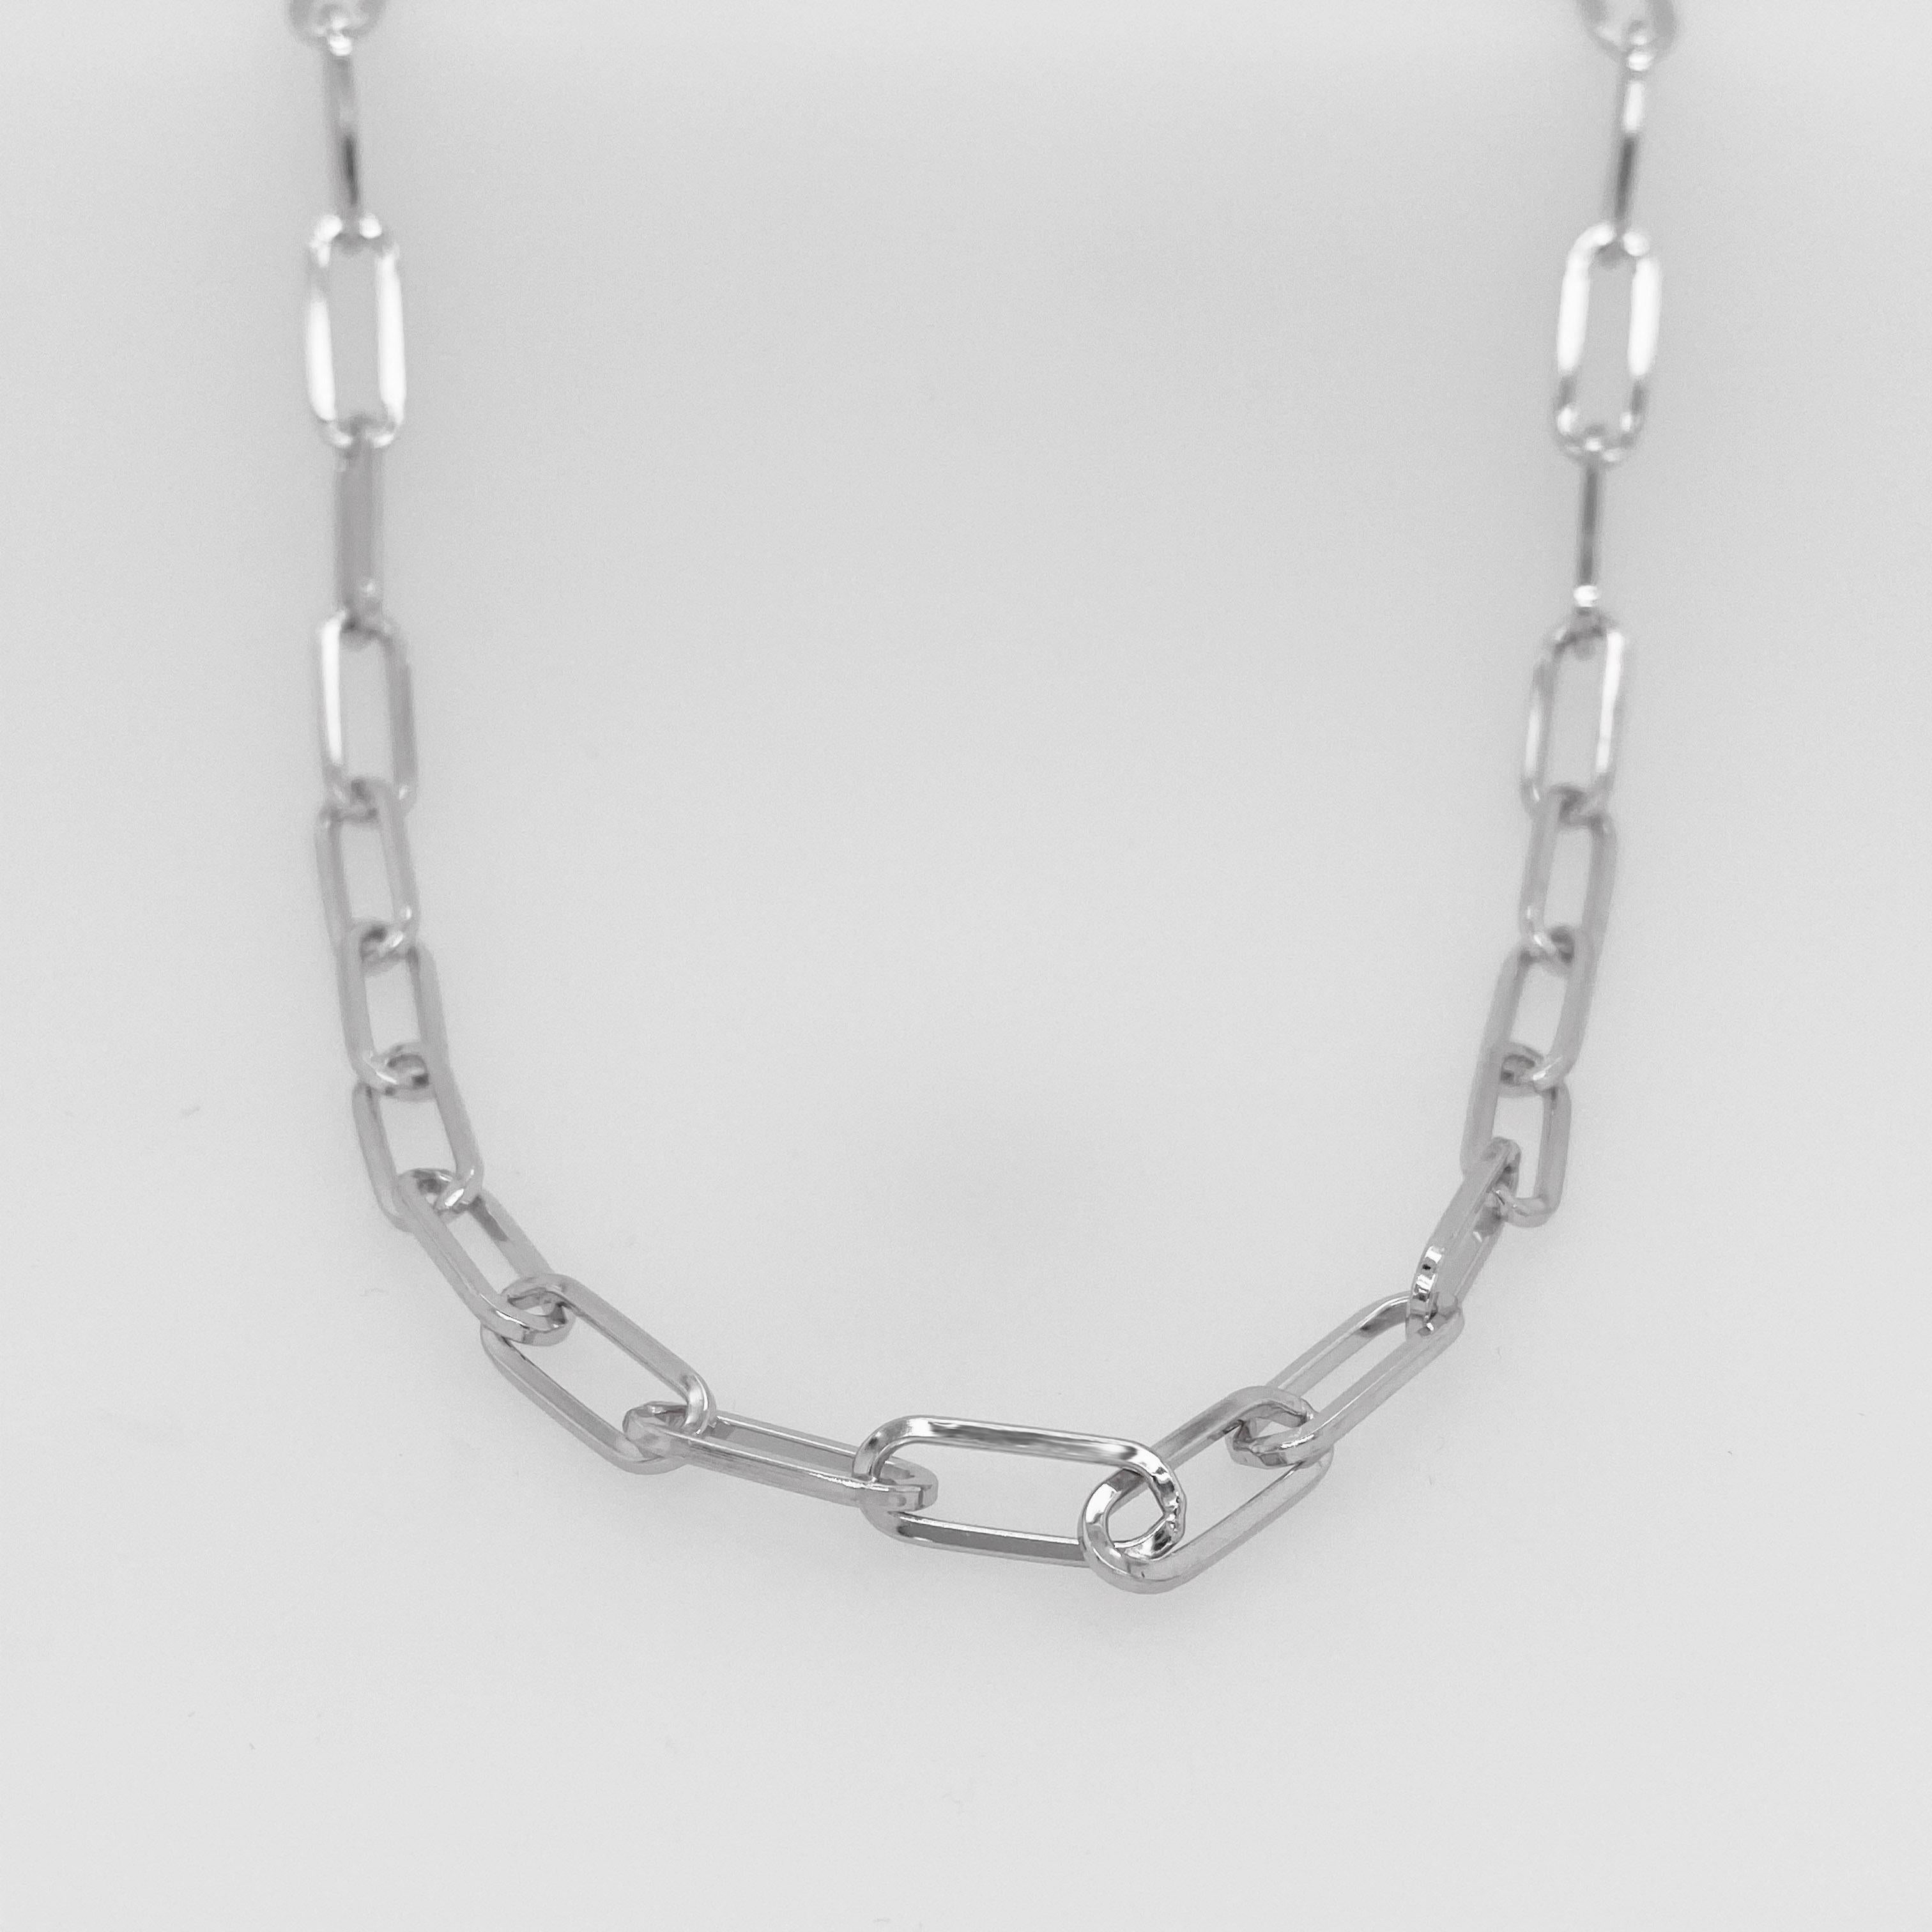 Sterling Silver Paperclip Chain is the 2020 Best Design!  The details are as follows:

Link Width: 3mm/.26in
Link Height: 14.93mm/.59in
Chain Length: 18in
Weight: 8.2

This chain is available in 10 inches (6.5mm paperclip bracelet) 16 inches, 20